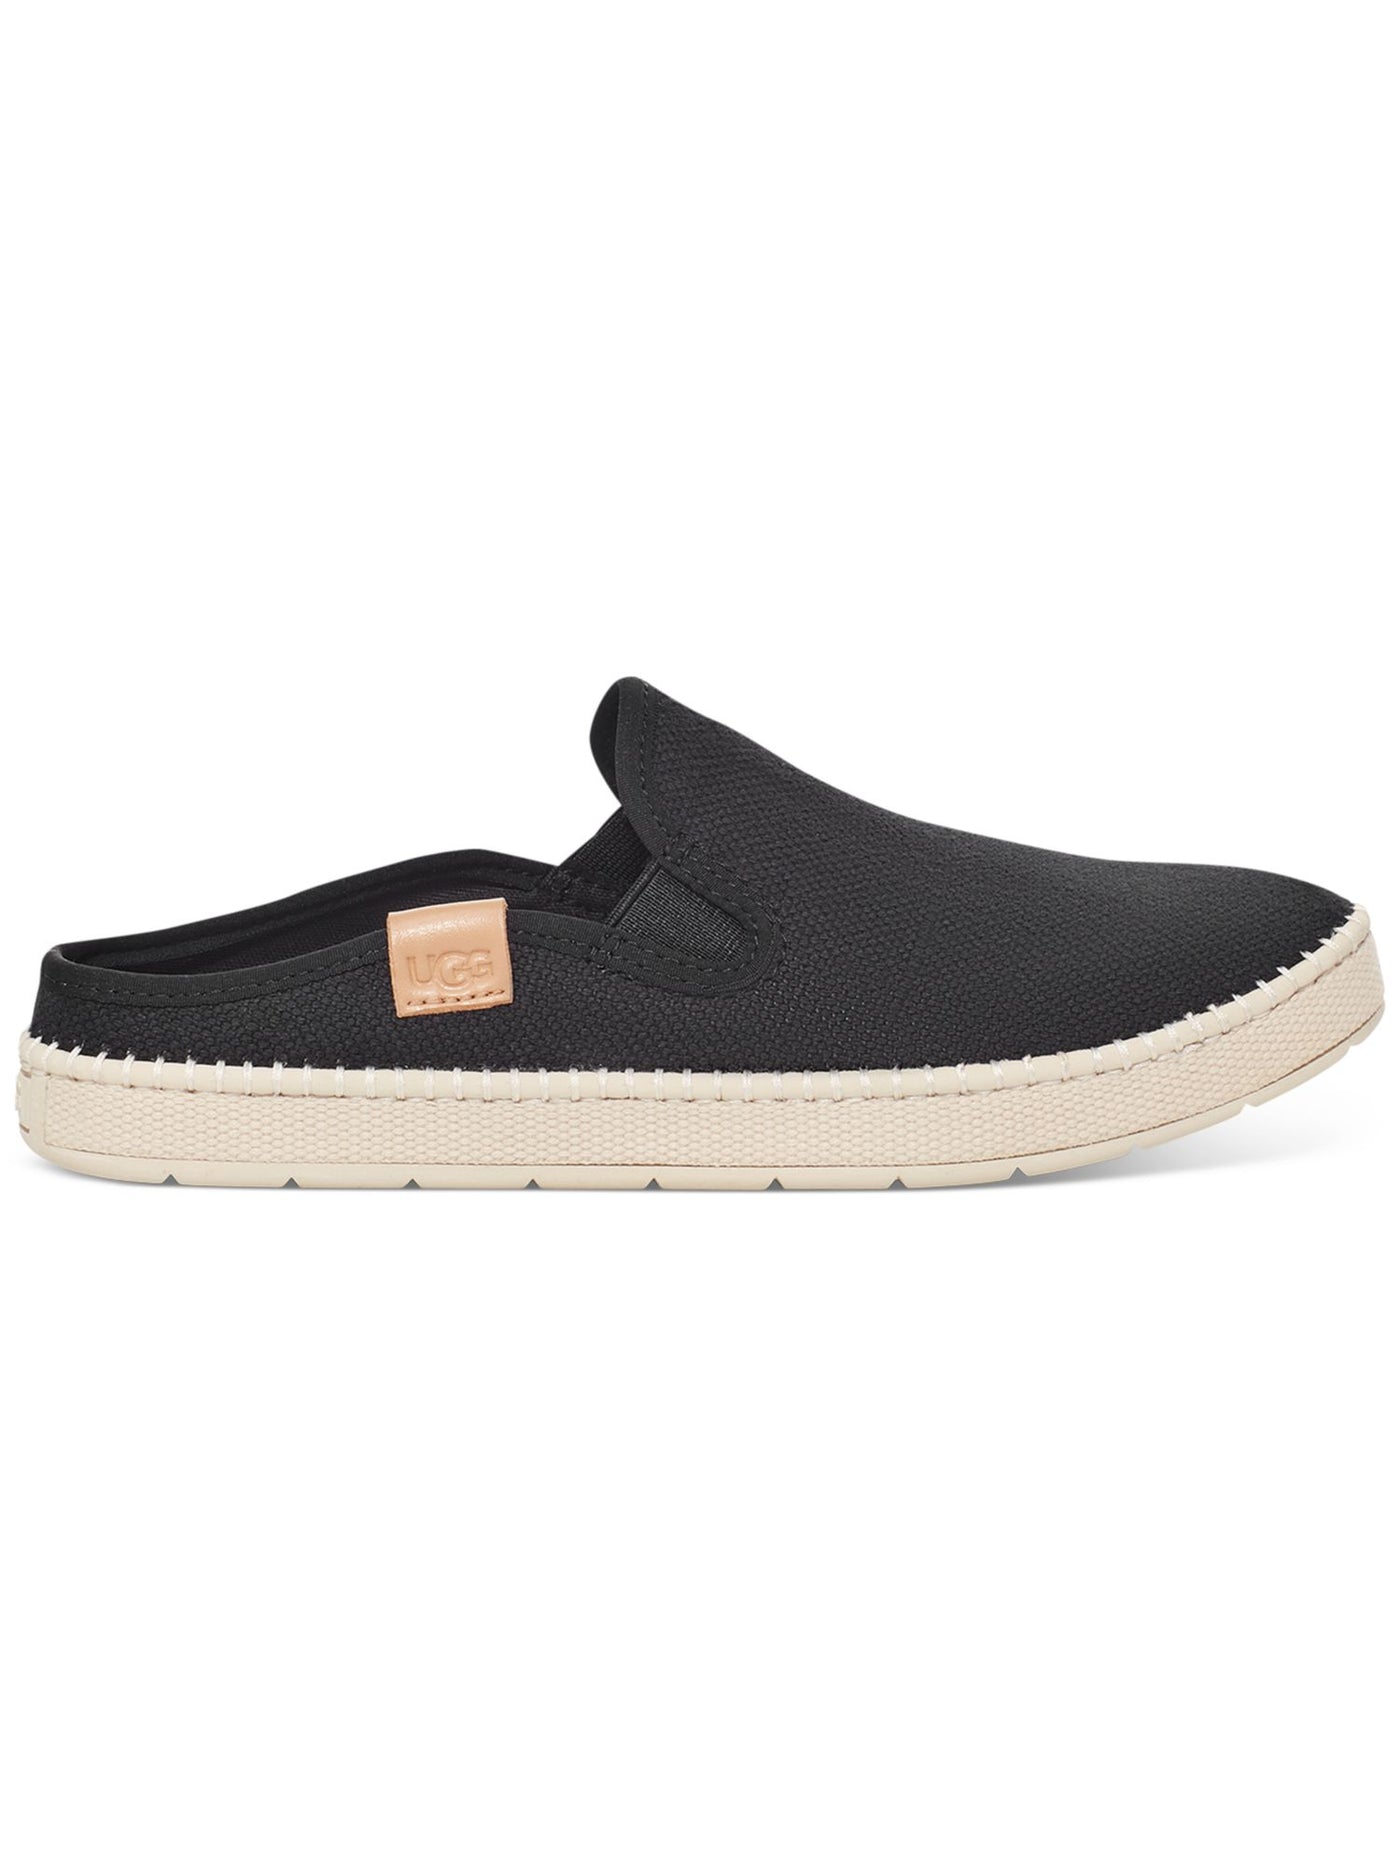 UGG Womens Black Goring Removable Insole Cushioned Delu Round Toe Platform Slip On Mules 7.5